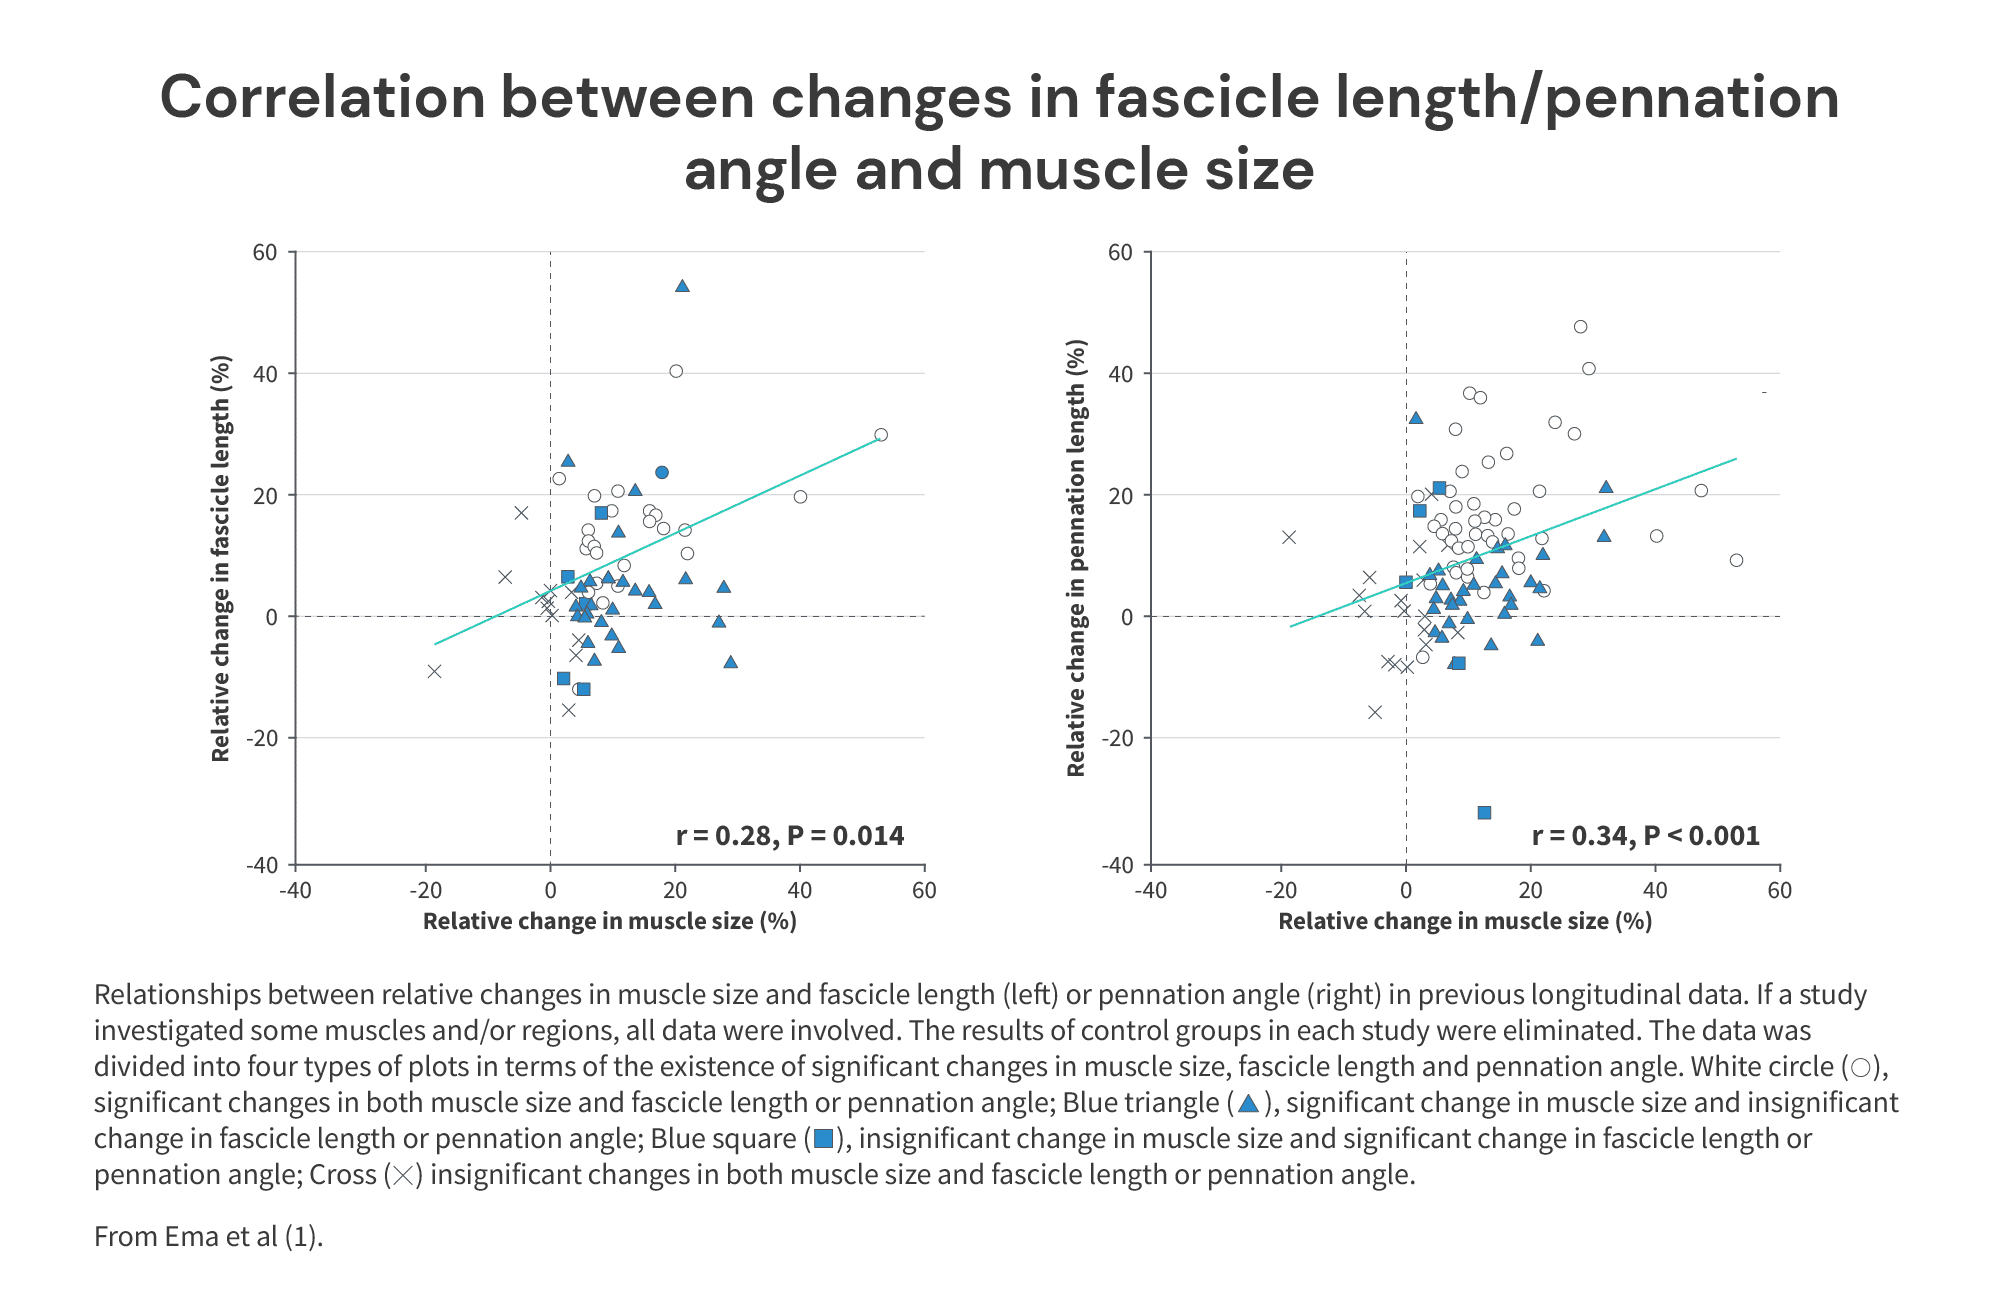 Correlation between changes in fascicle length / pennation angle and muscle size